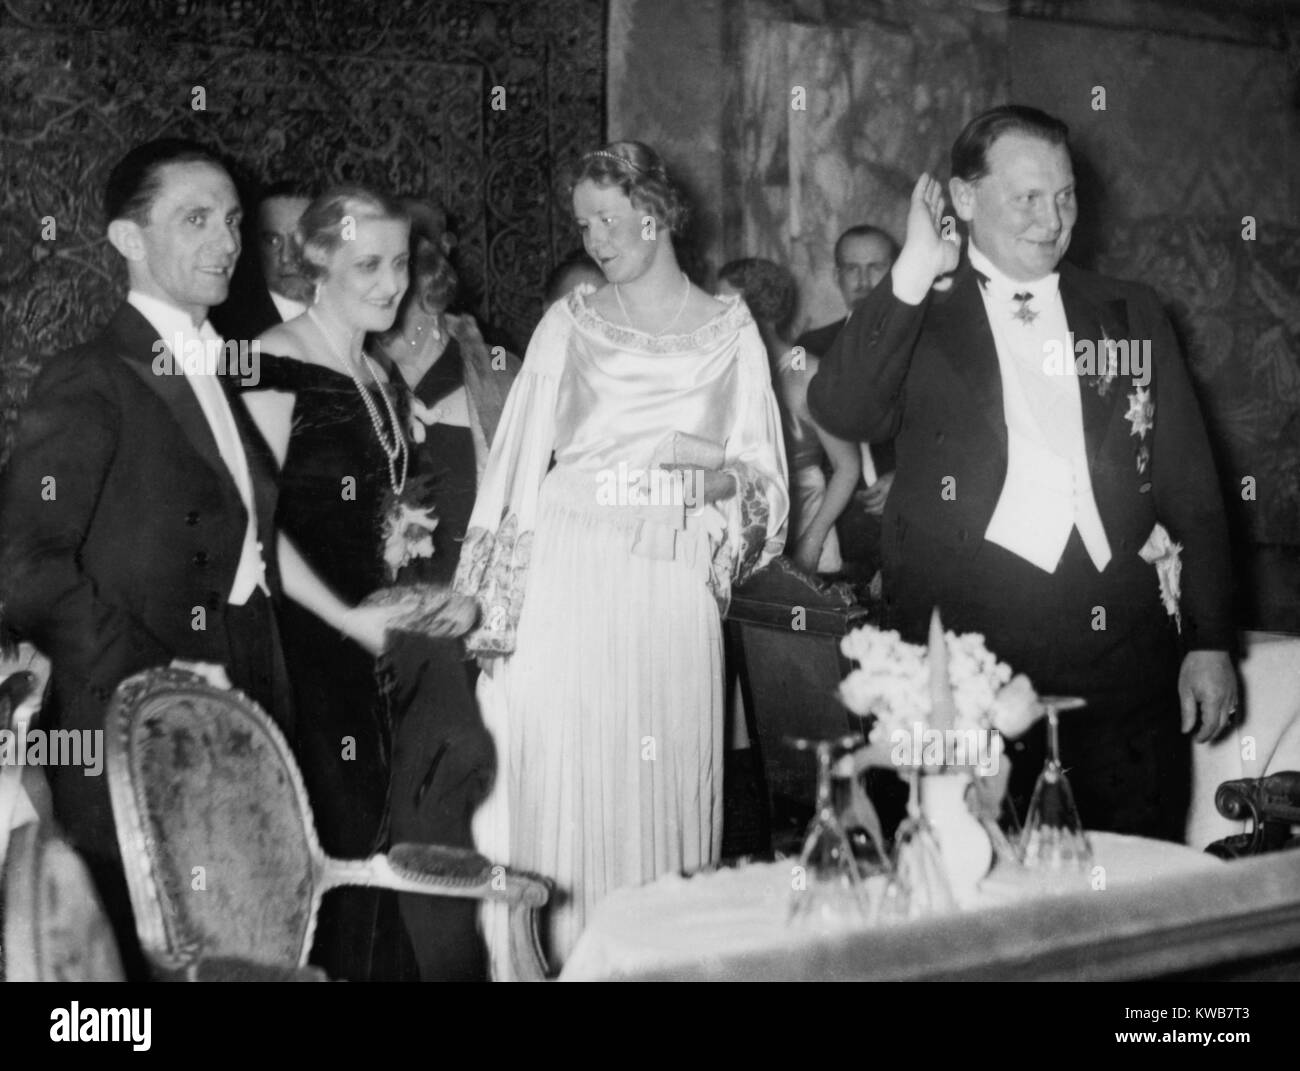 Joseph and Magda Goebbels with Emmy and Hermann Goering at the Press Ball. As wives of the second and third most important German Nazis', they often appeared at official functions. Berlin, Germany, 1939. (BSLOC 2014 8 175) Stock Photo